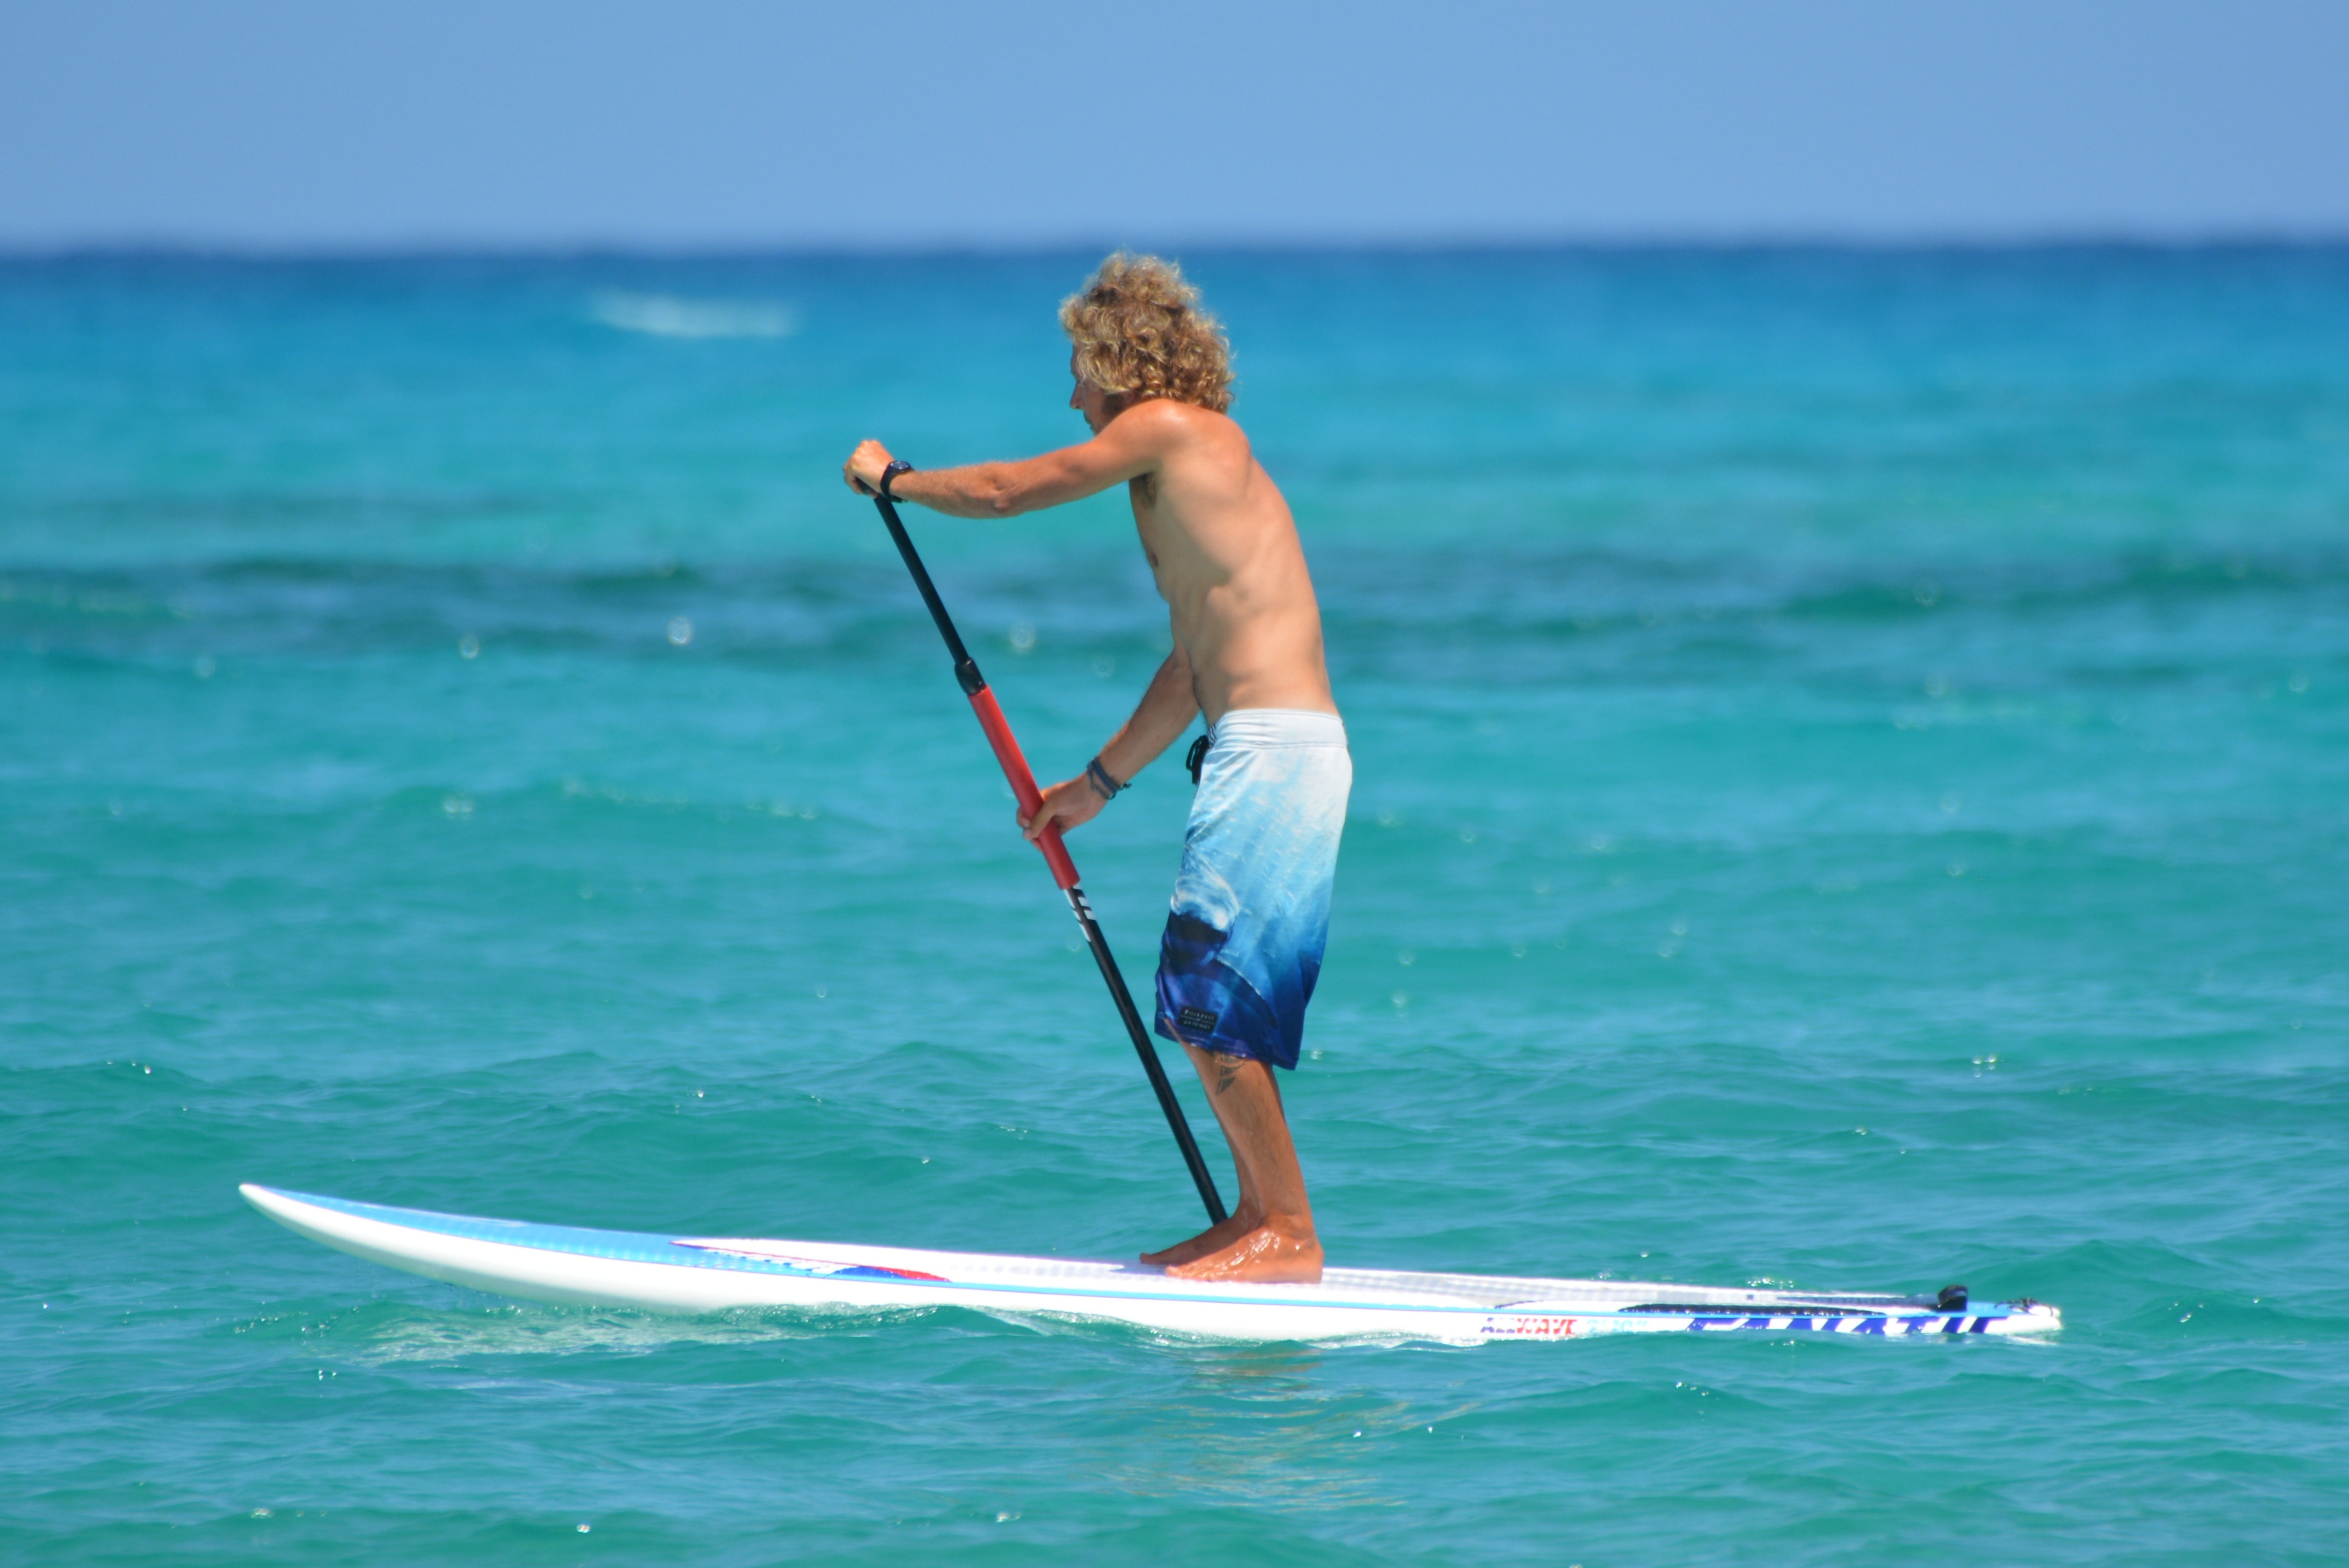 man in white and blue board-shorts standing on white surfboard during daytime